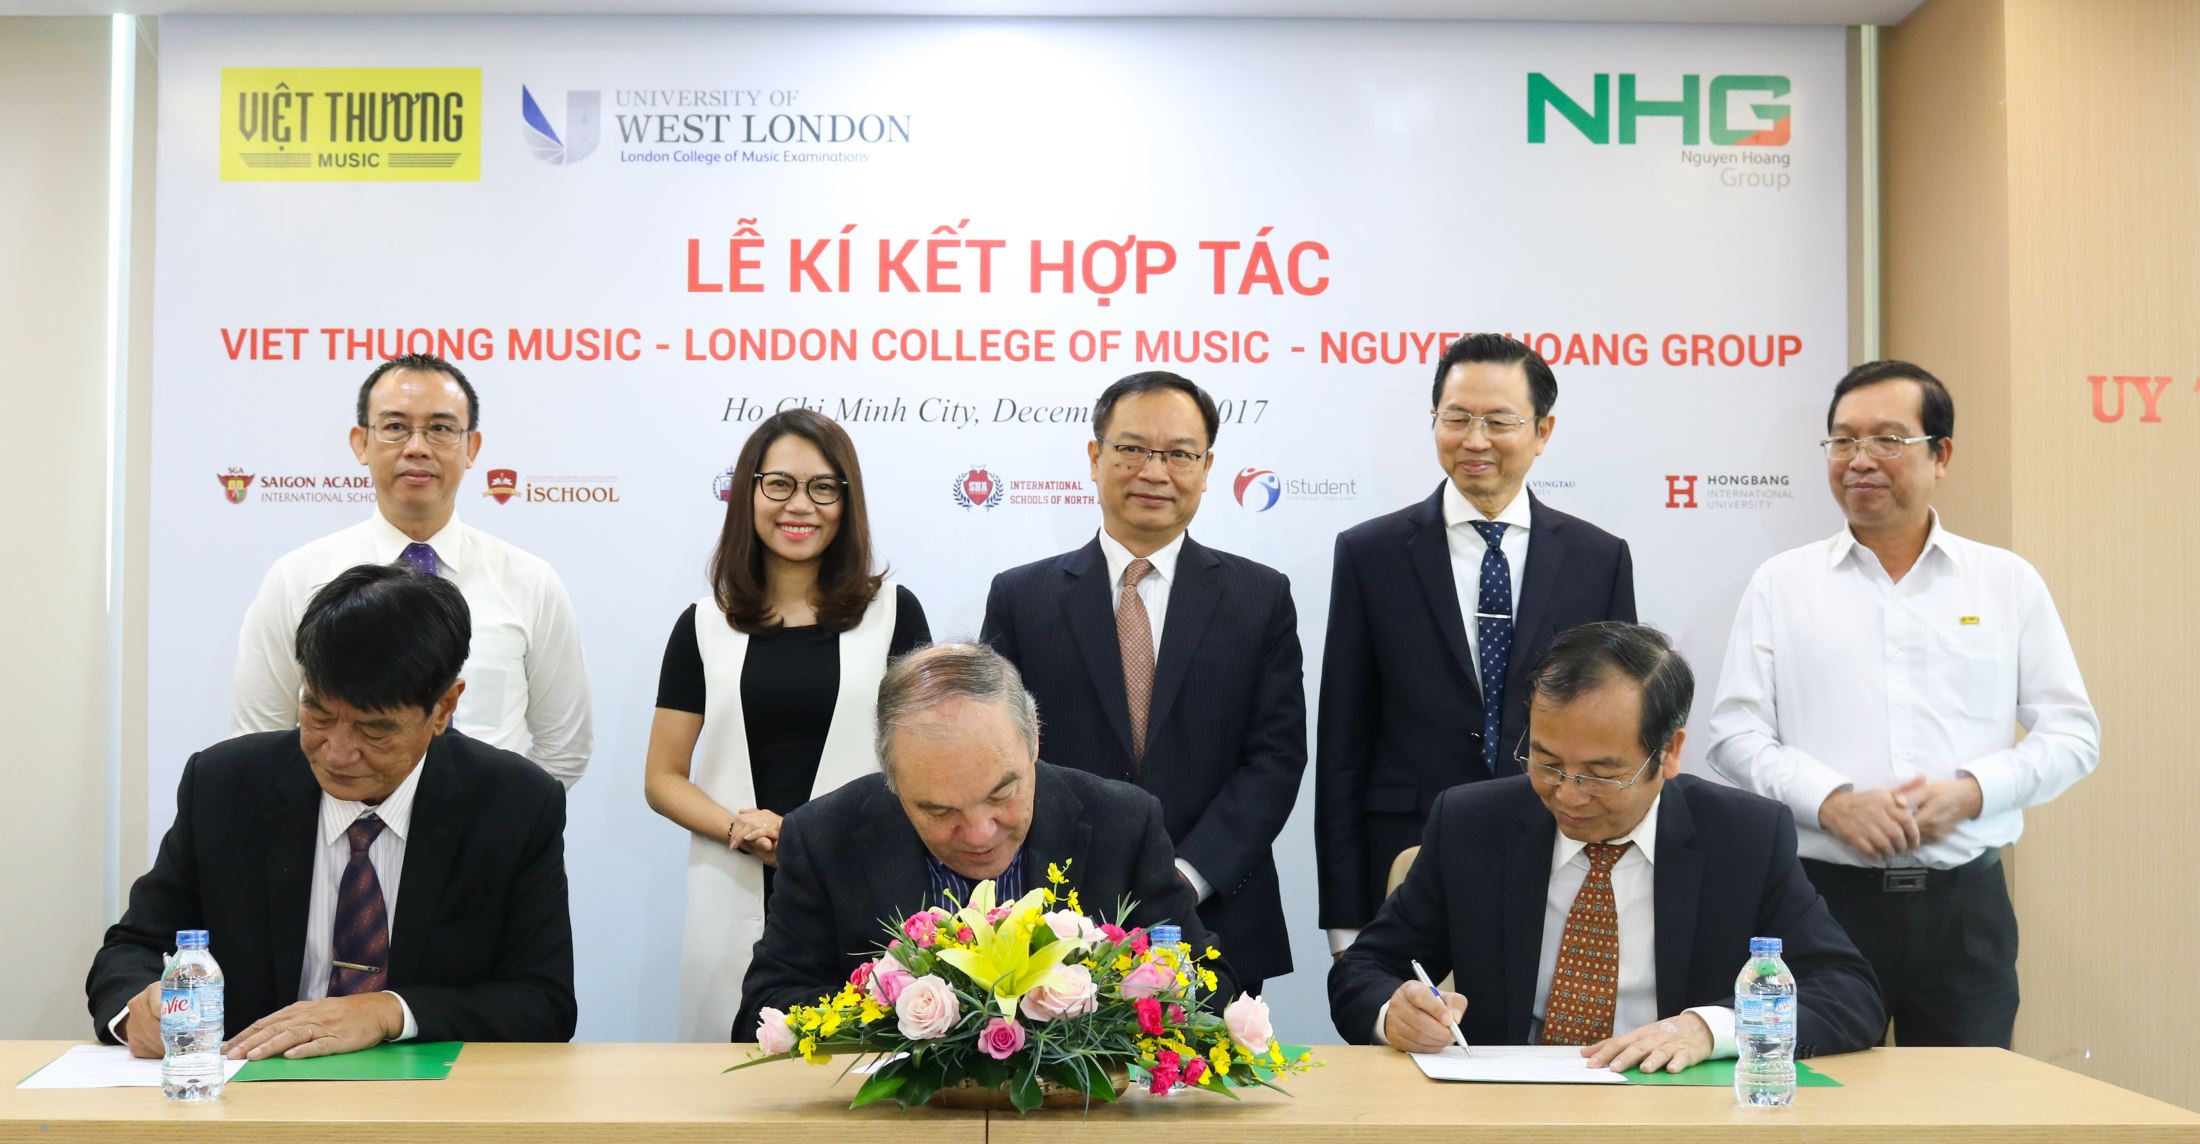 Prof., Dr. John Howard -  LCME Director, Dr. Do Manh Cuong, Permanent Member of Education Council, NHG's Academic Director and Mr. Pham Kim, General Administrator in Vietnam proceeded the signing ceremony